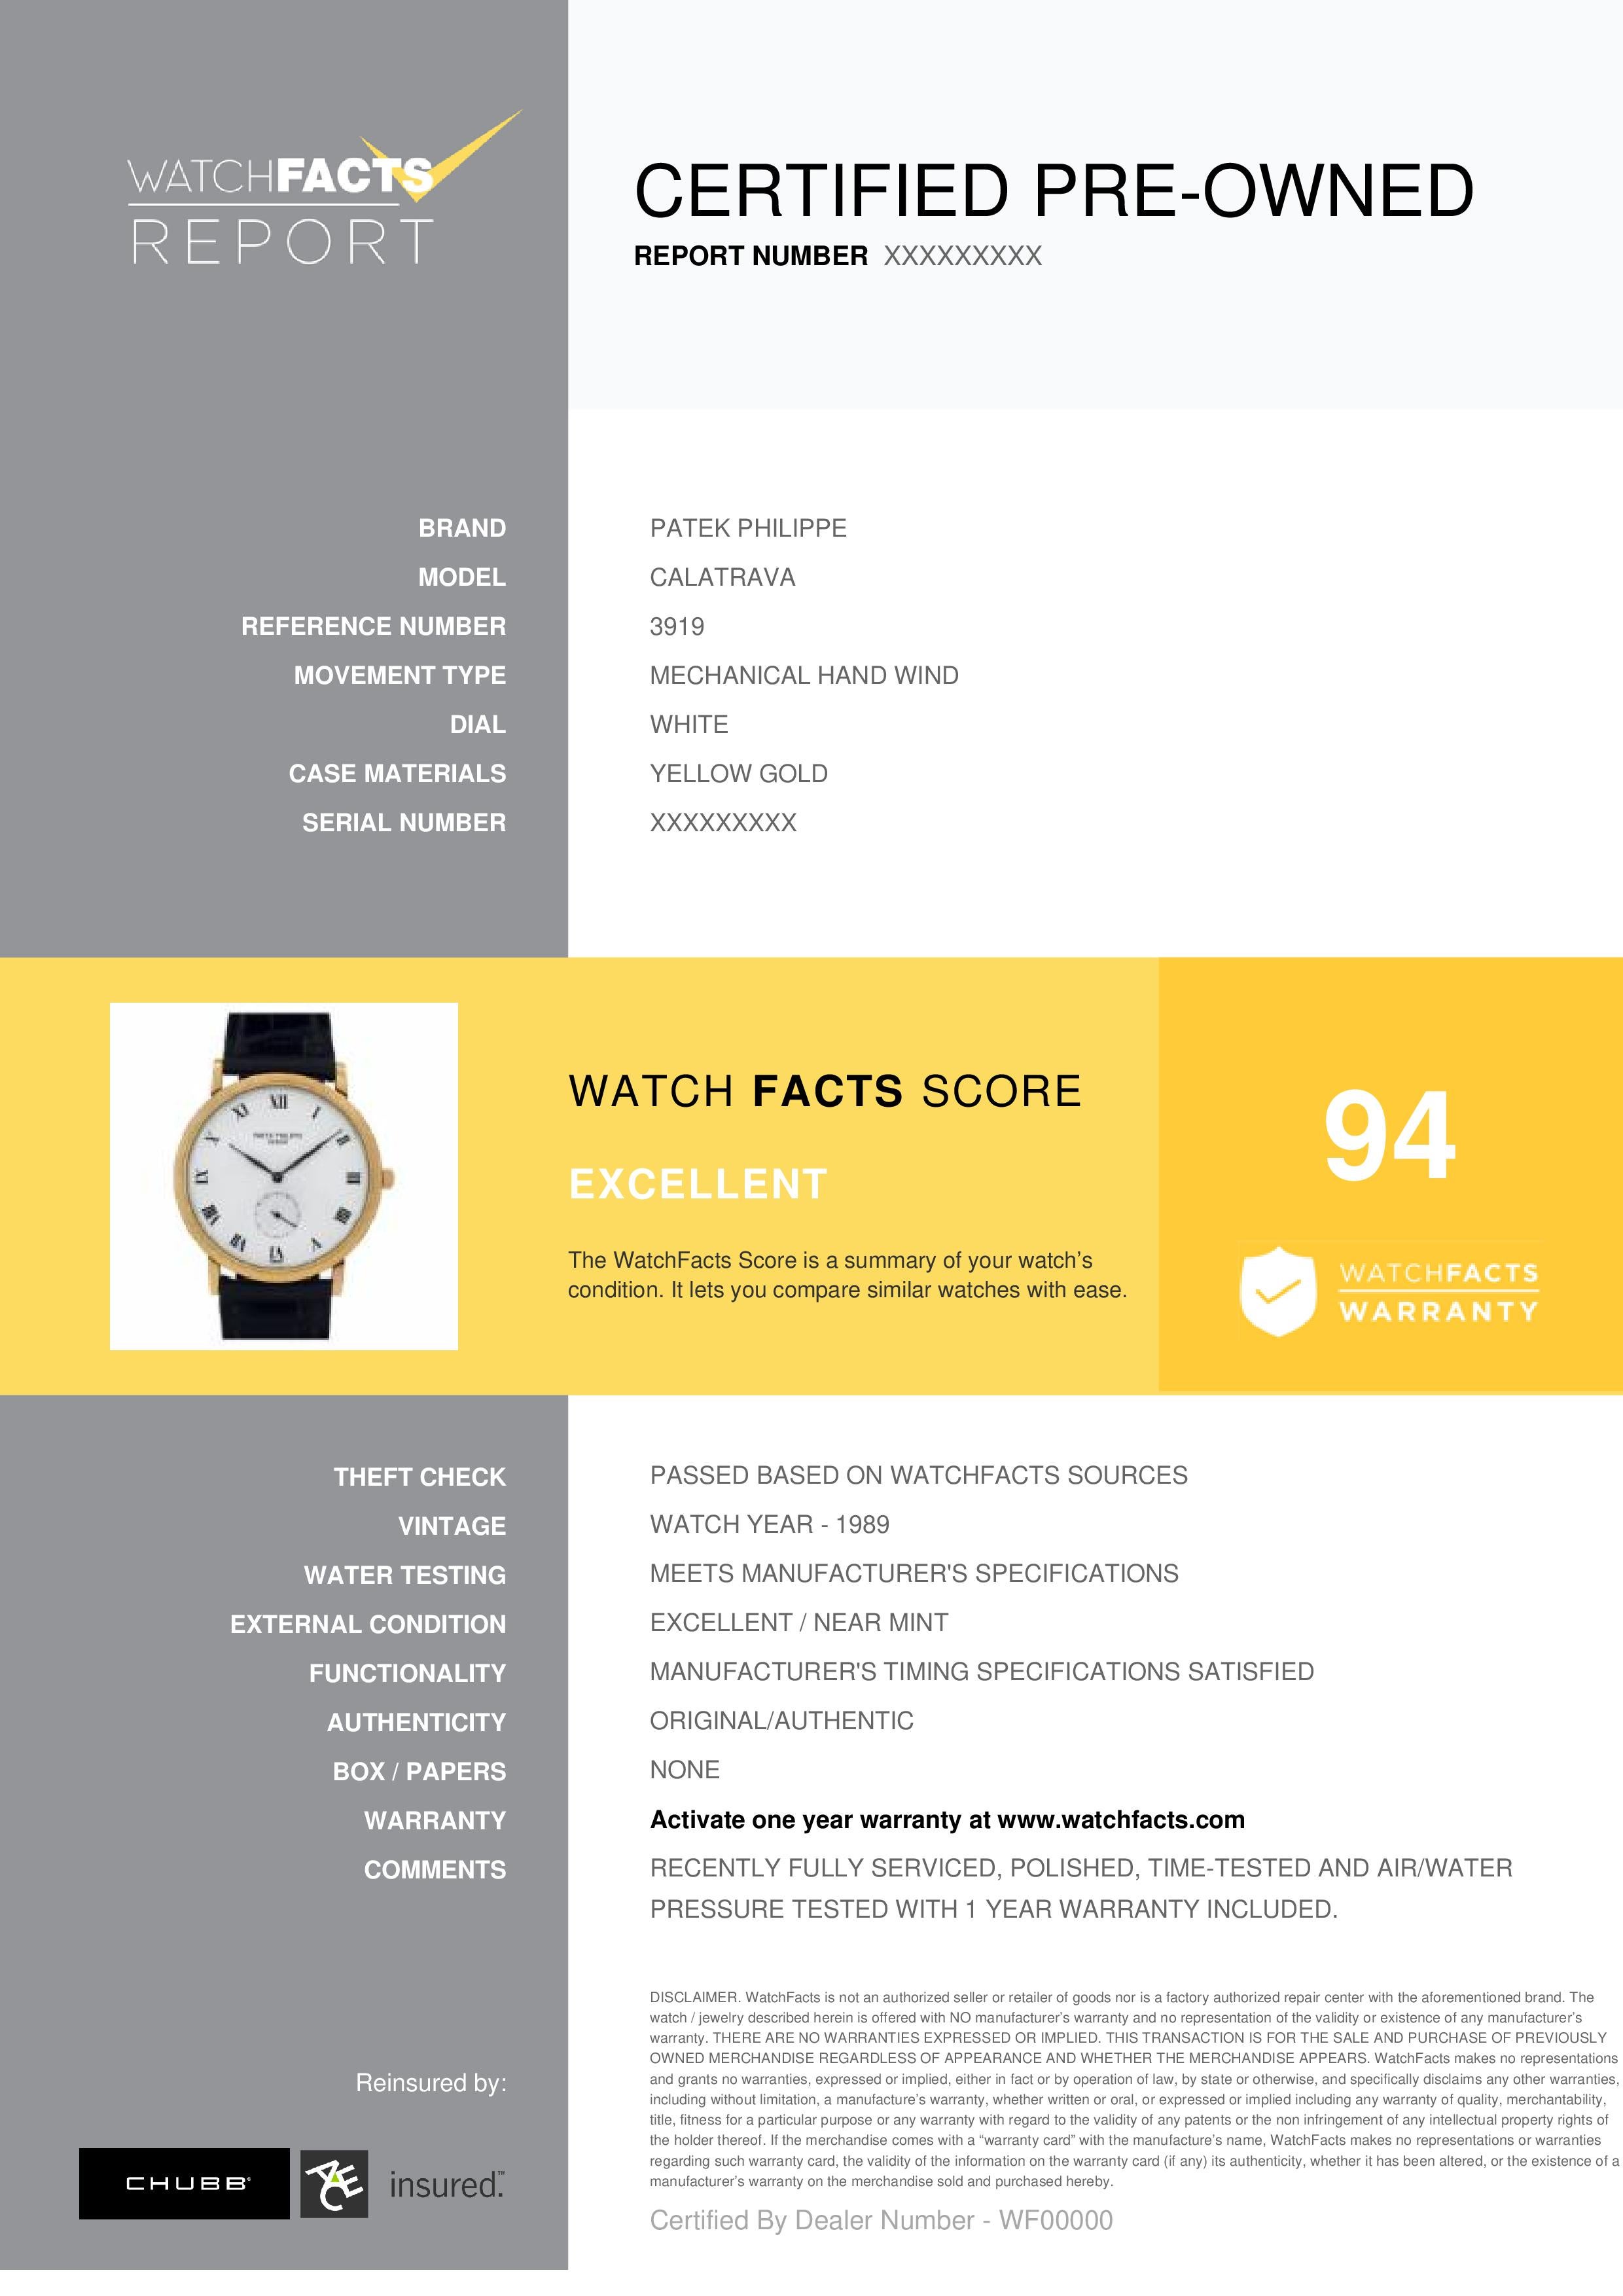 Patek Philippe Calatrava Reference #: 3919. Mens Mechanical Hand Wind Watch Yellow Gold White 33 MM. Verified and Certified by WatchFacts. 1 year warranty offered by WatchFacts.
